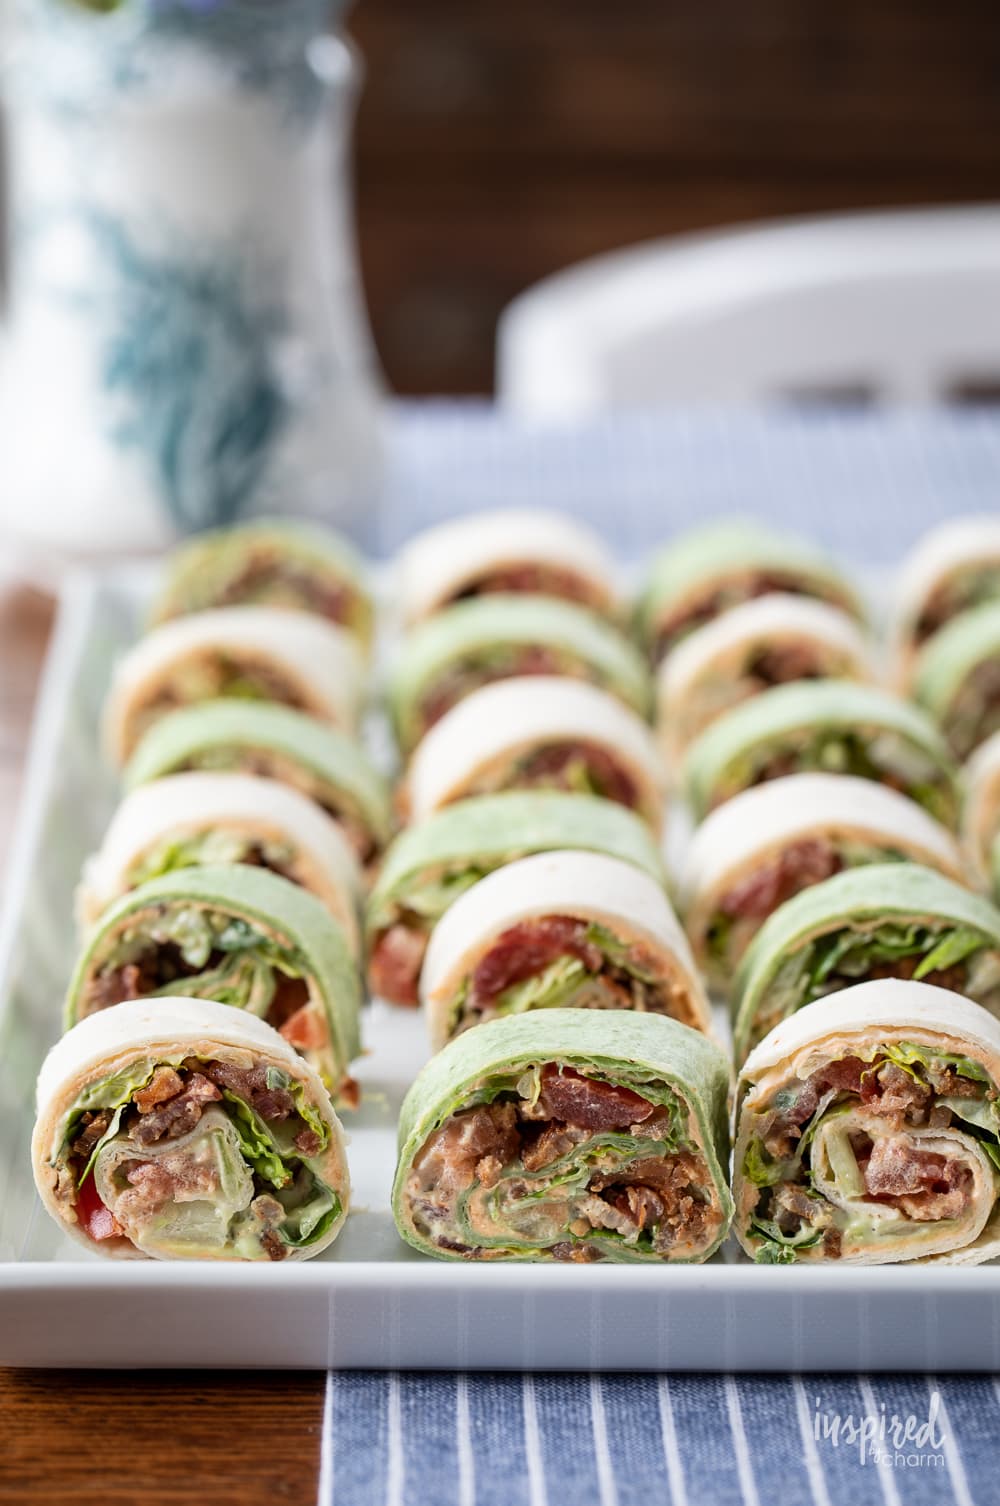 BLT Pinwheel Sandwiches on a platter on table with table runner.